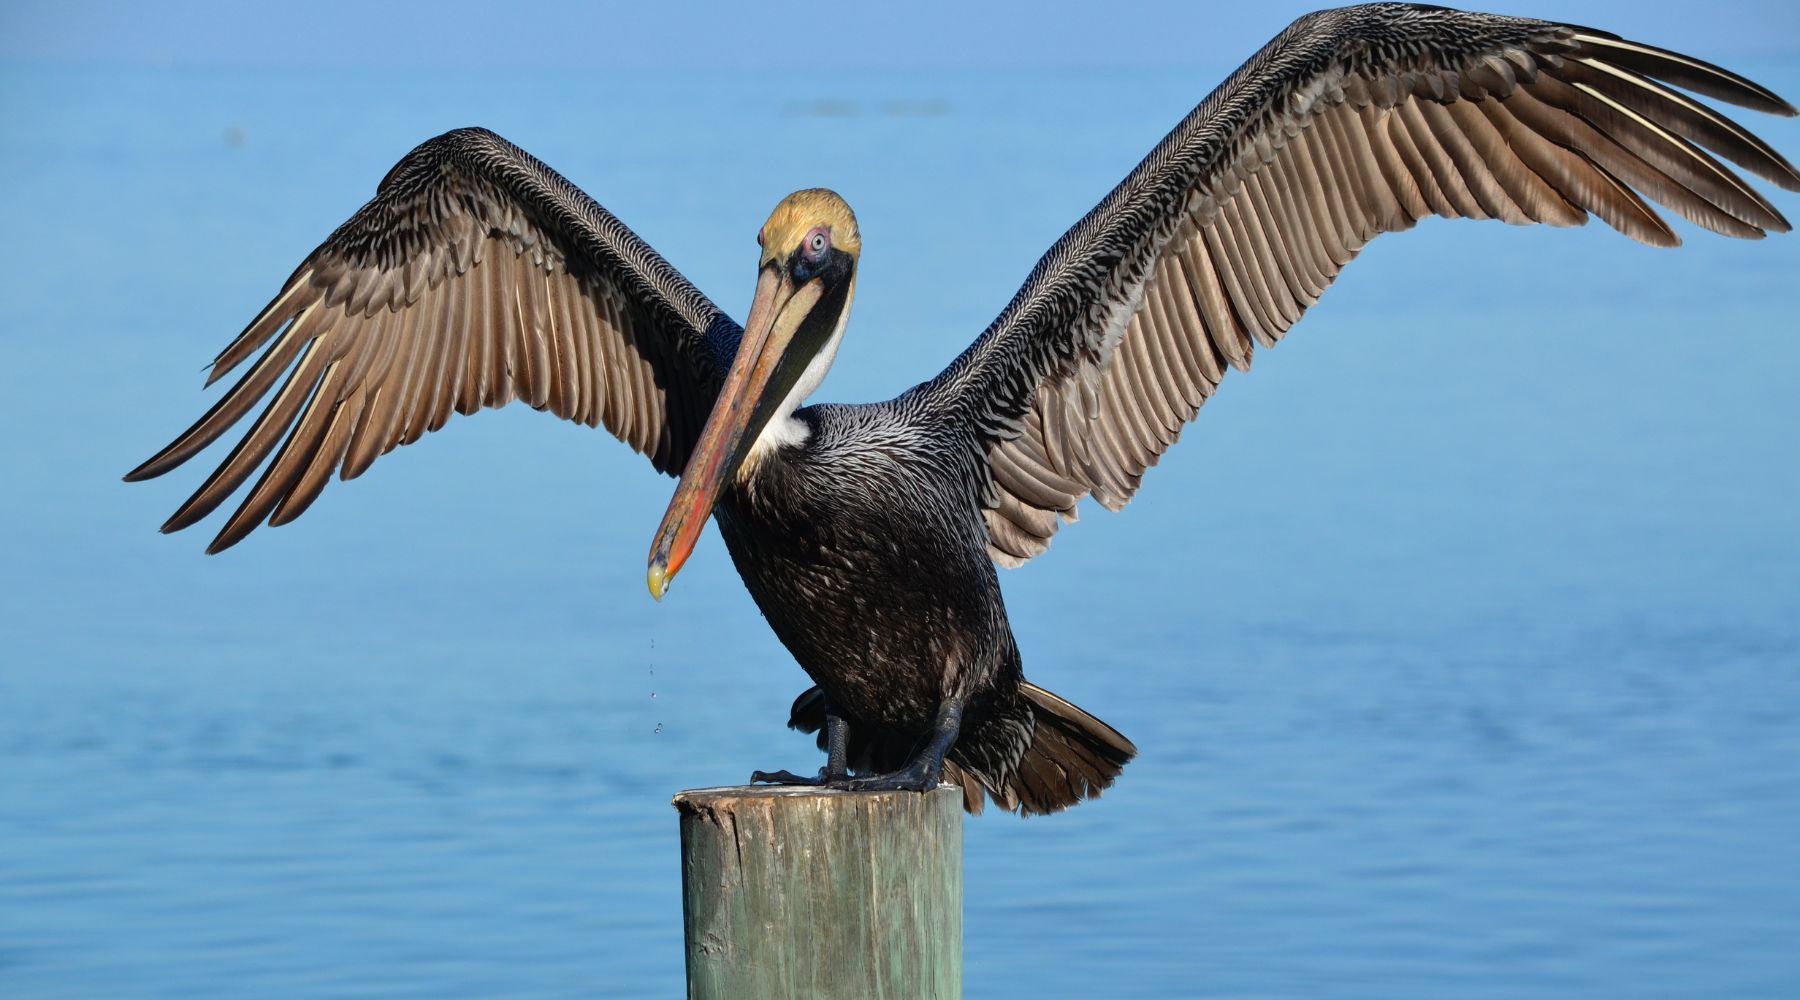 Brown pelican fun facts - brown pelican perched on post